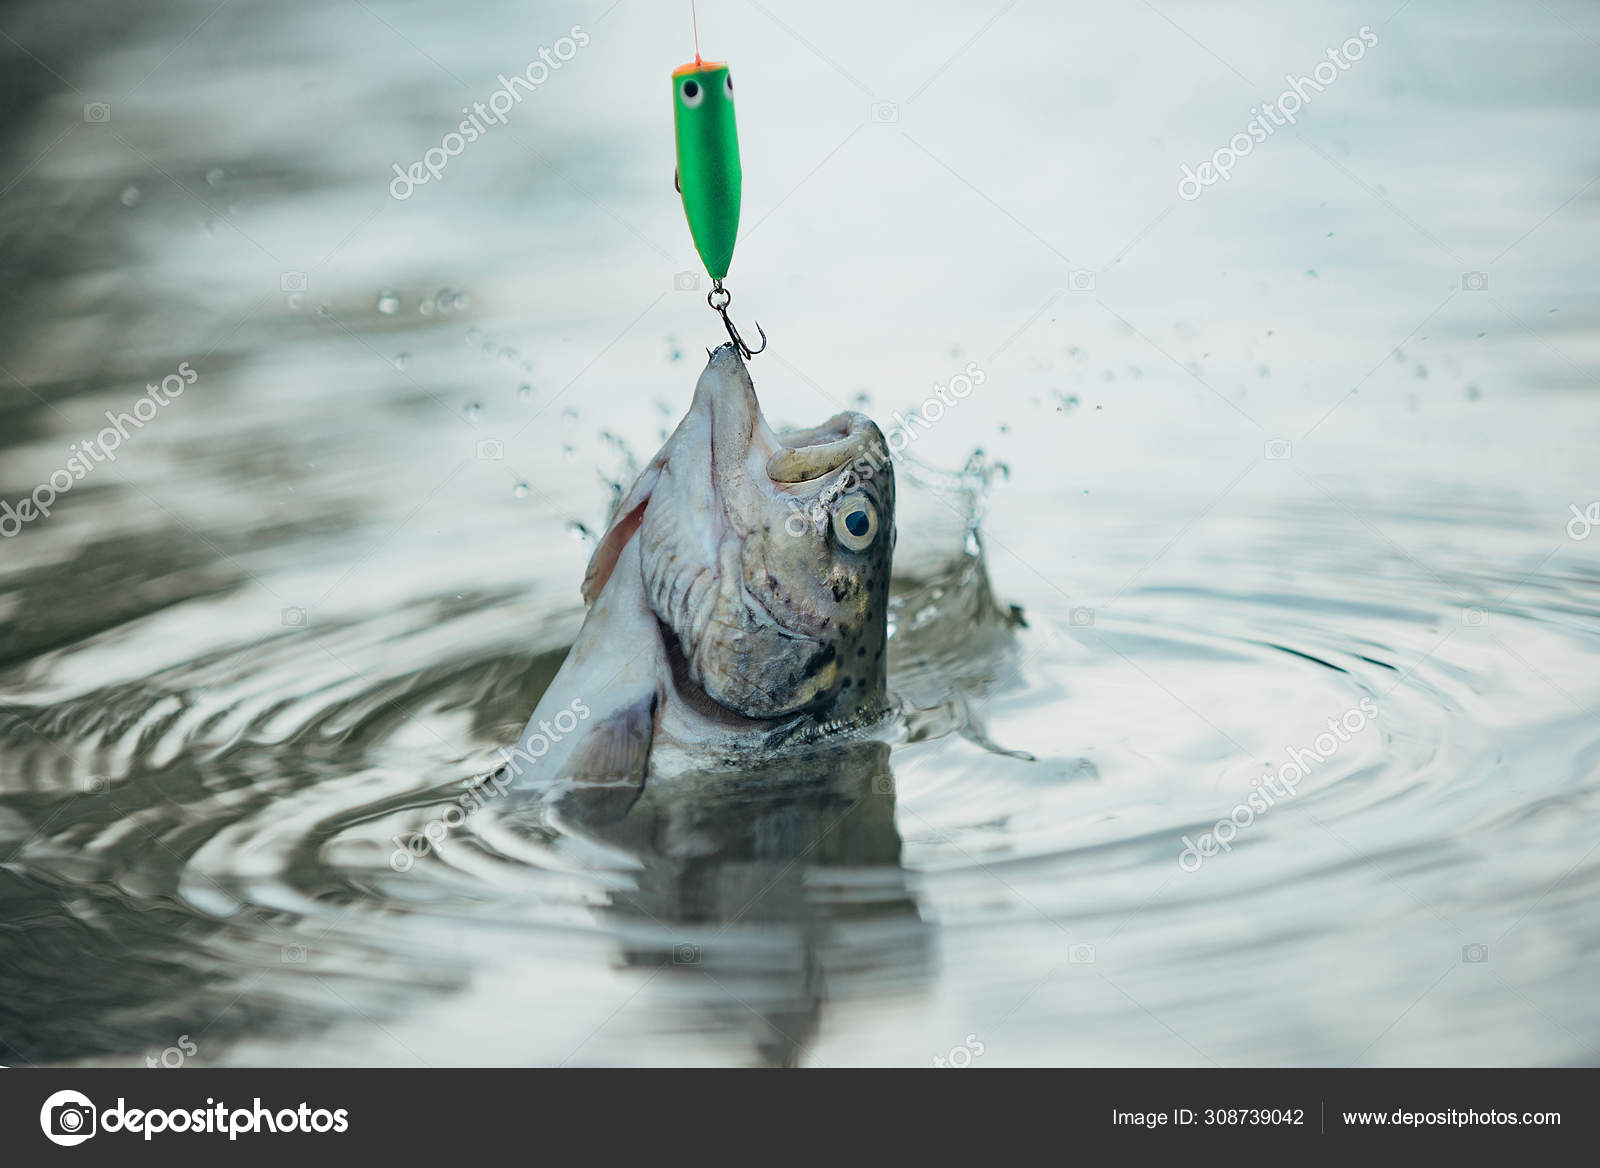 Fishes catching hooks. Fish trout on a hook. Brown trout being caught in  fishing net. Fly fishing for trout. — Stock Photo © Tverdohlib.com  #308739042